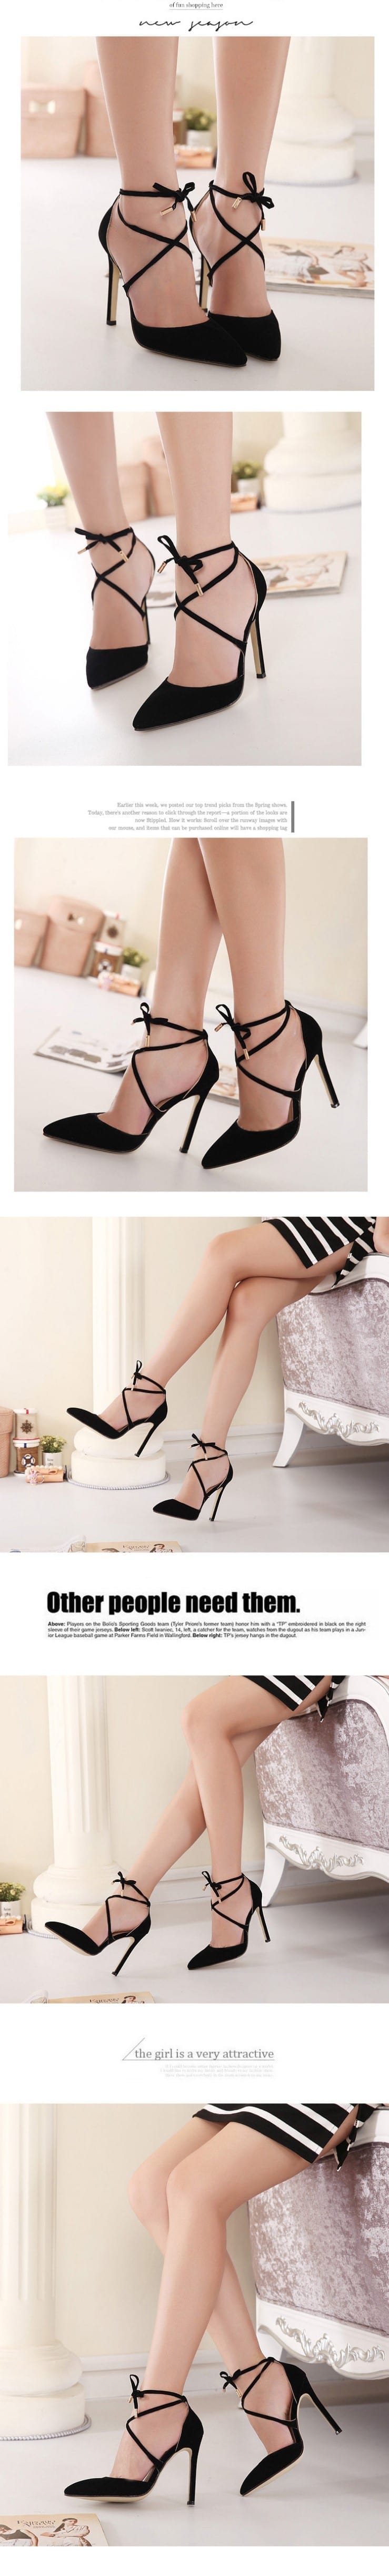 Lace Up High Heels Pointed Toe Bandage Stiletto Black Pumps